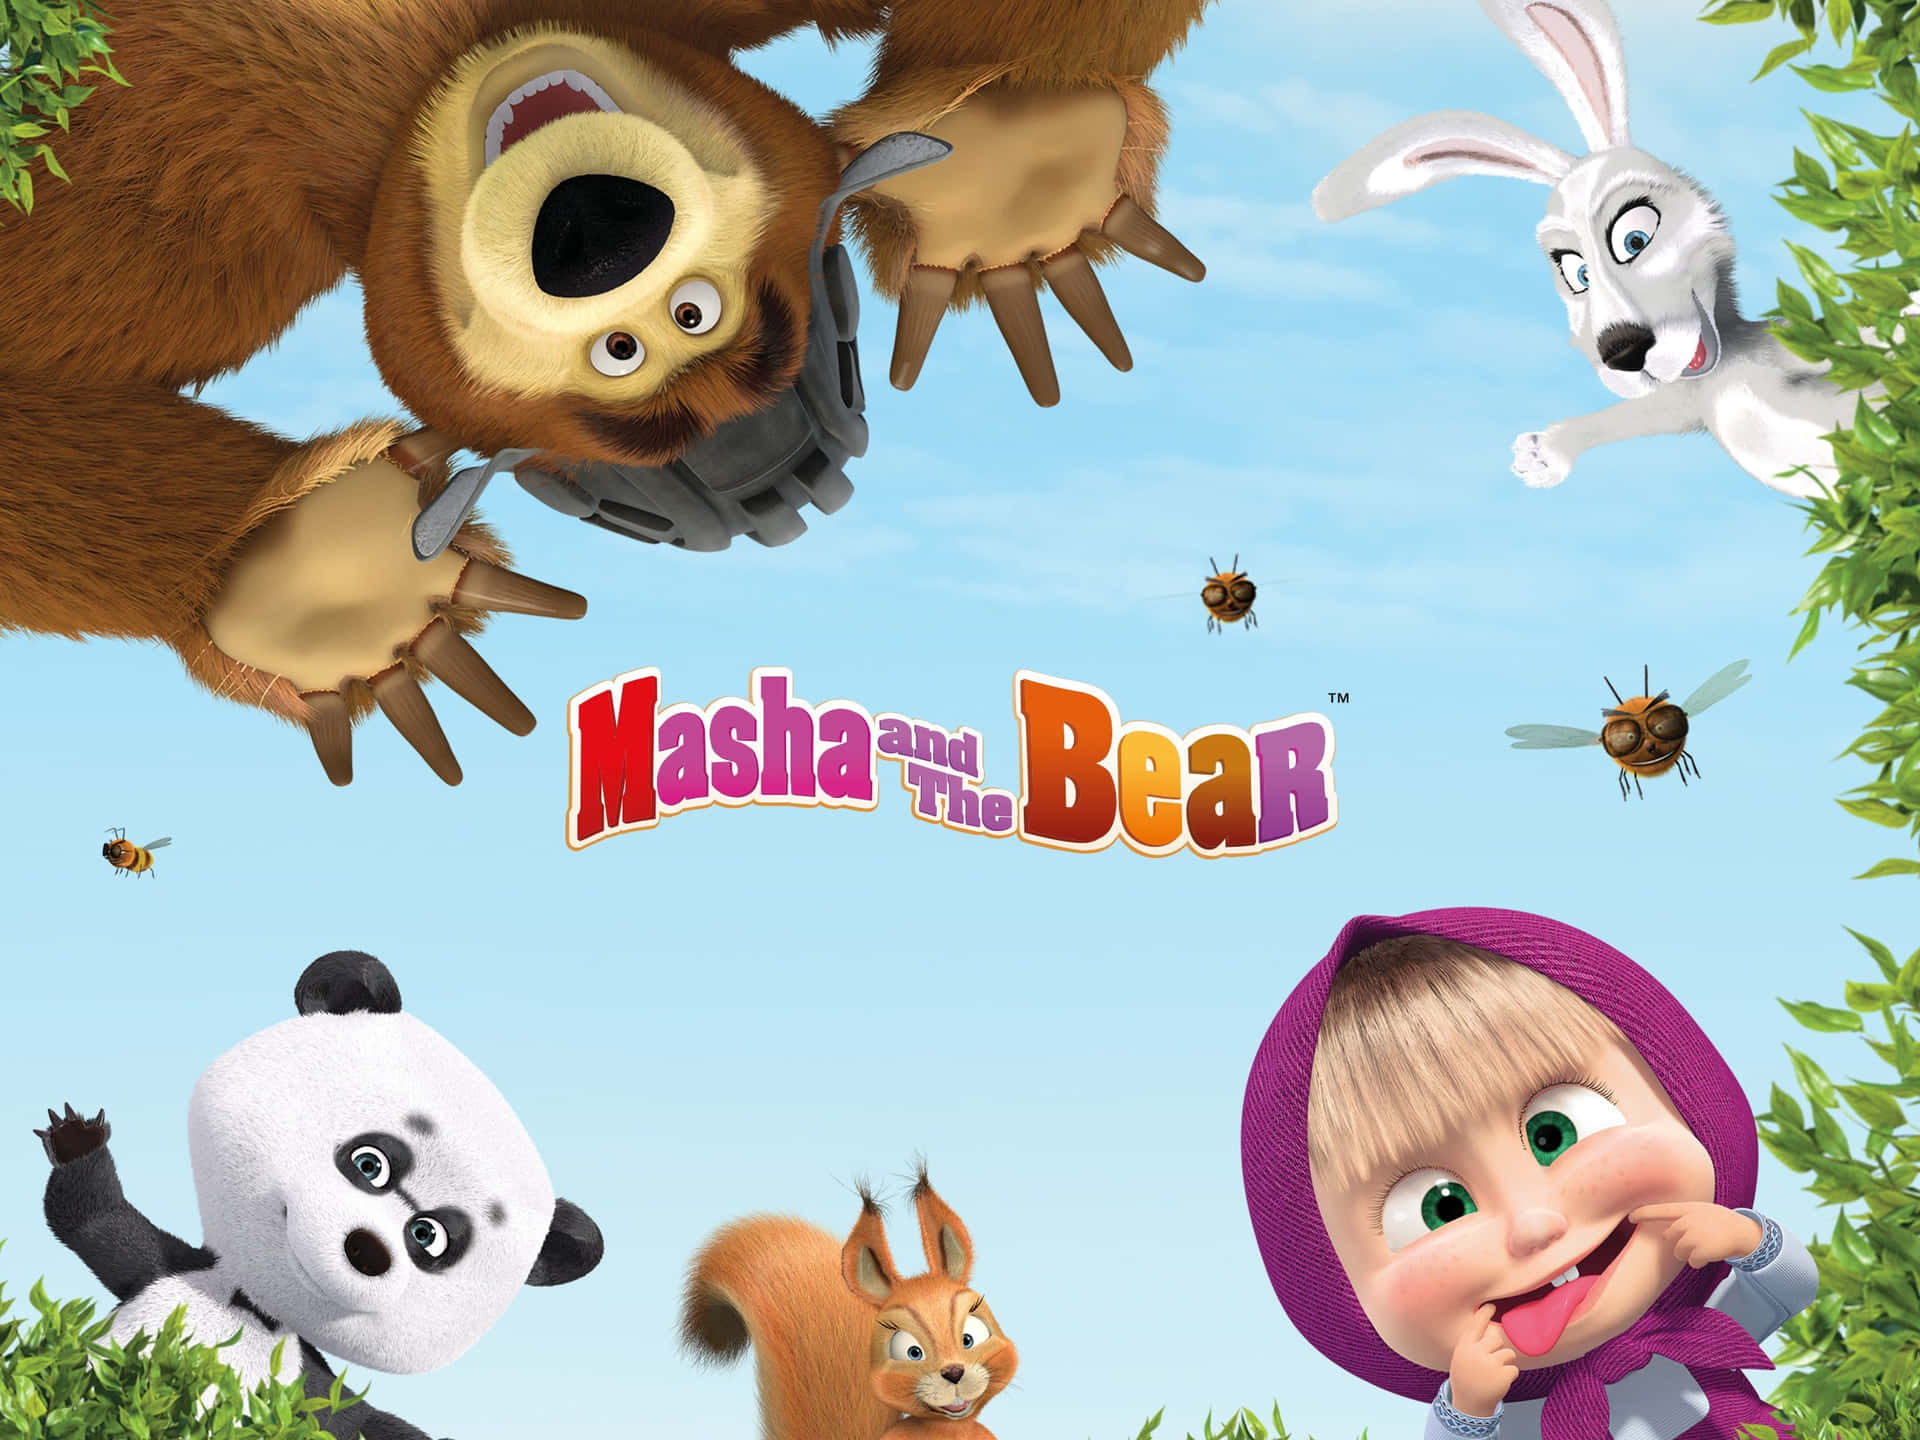 Caption: Masha and the Bear enjoying a sunny day in the forest